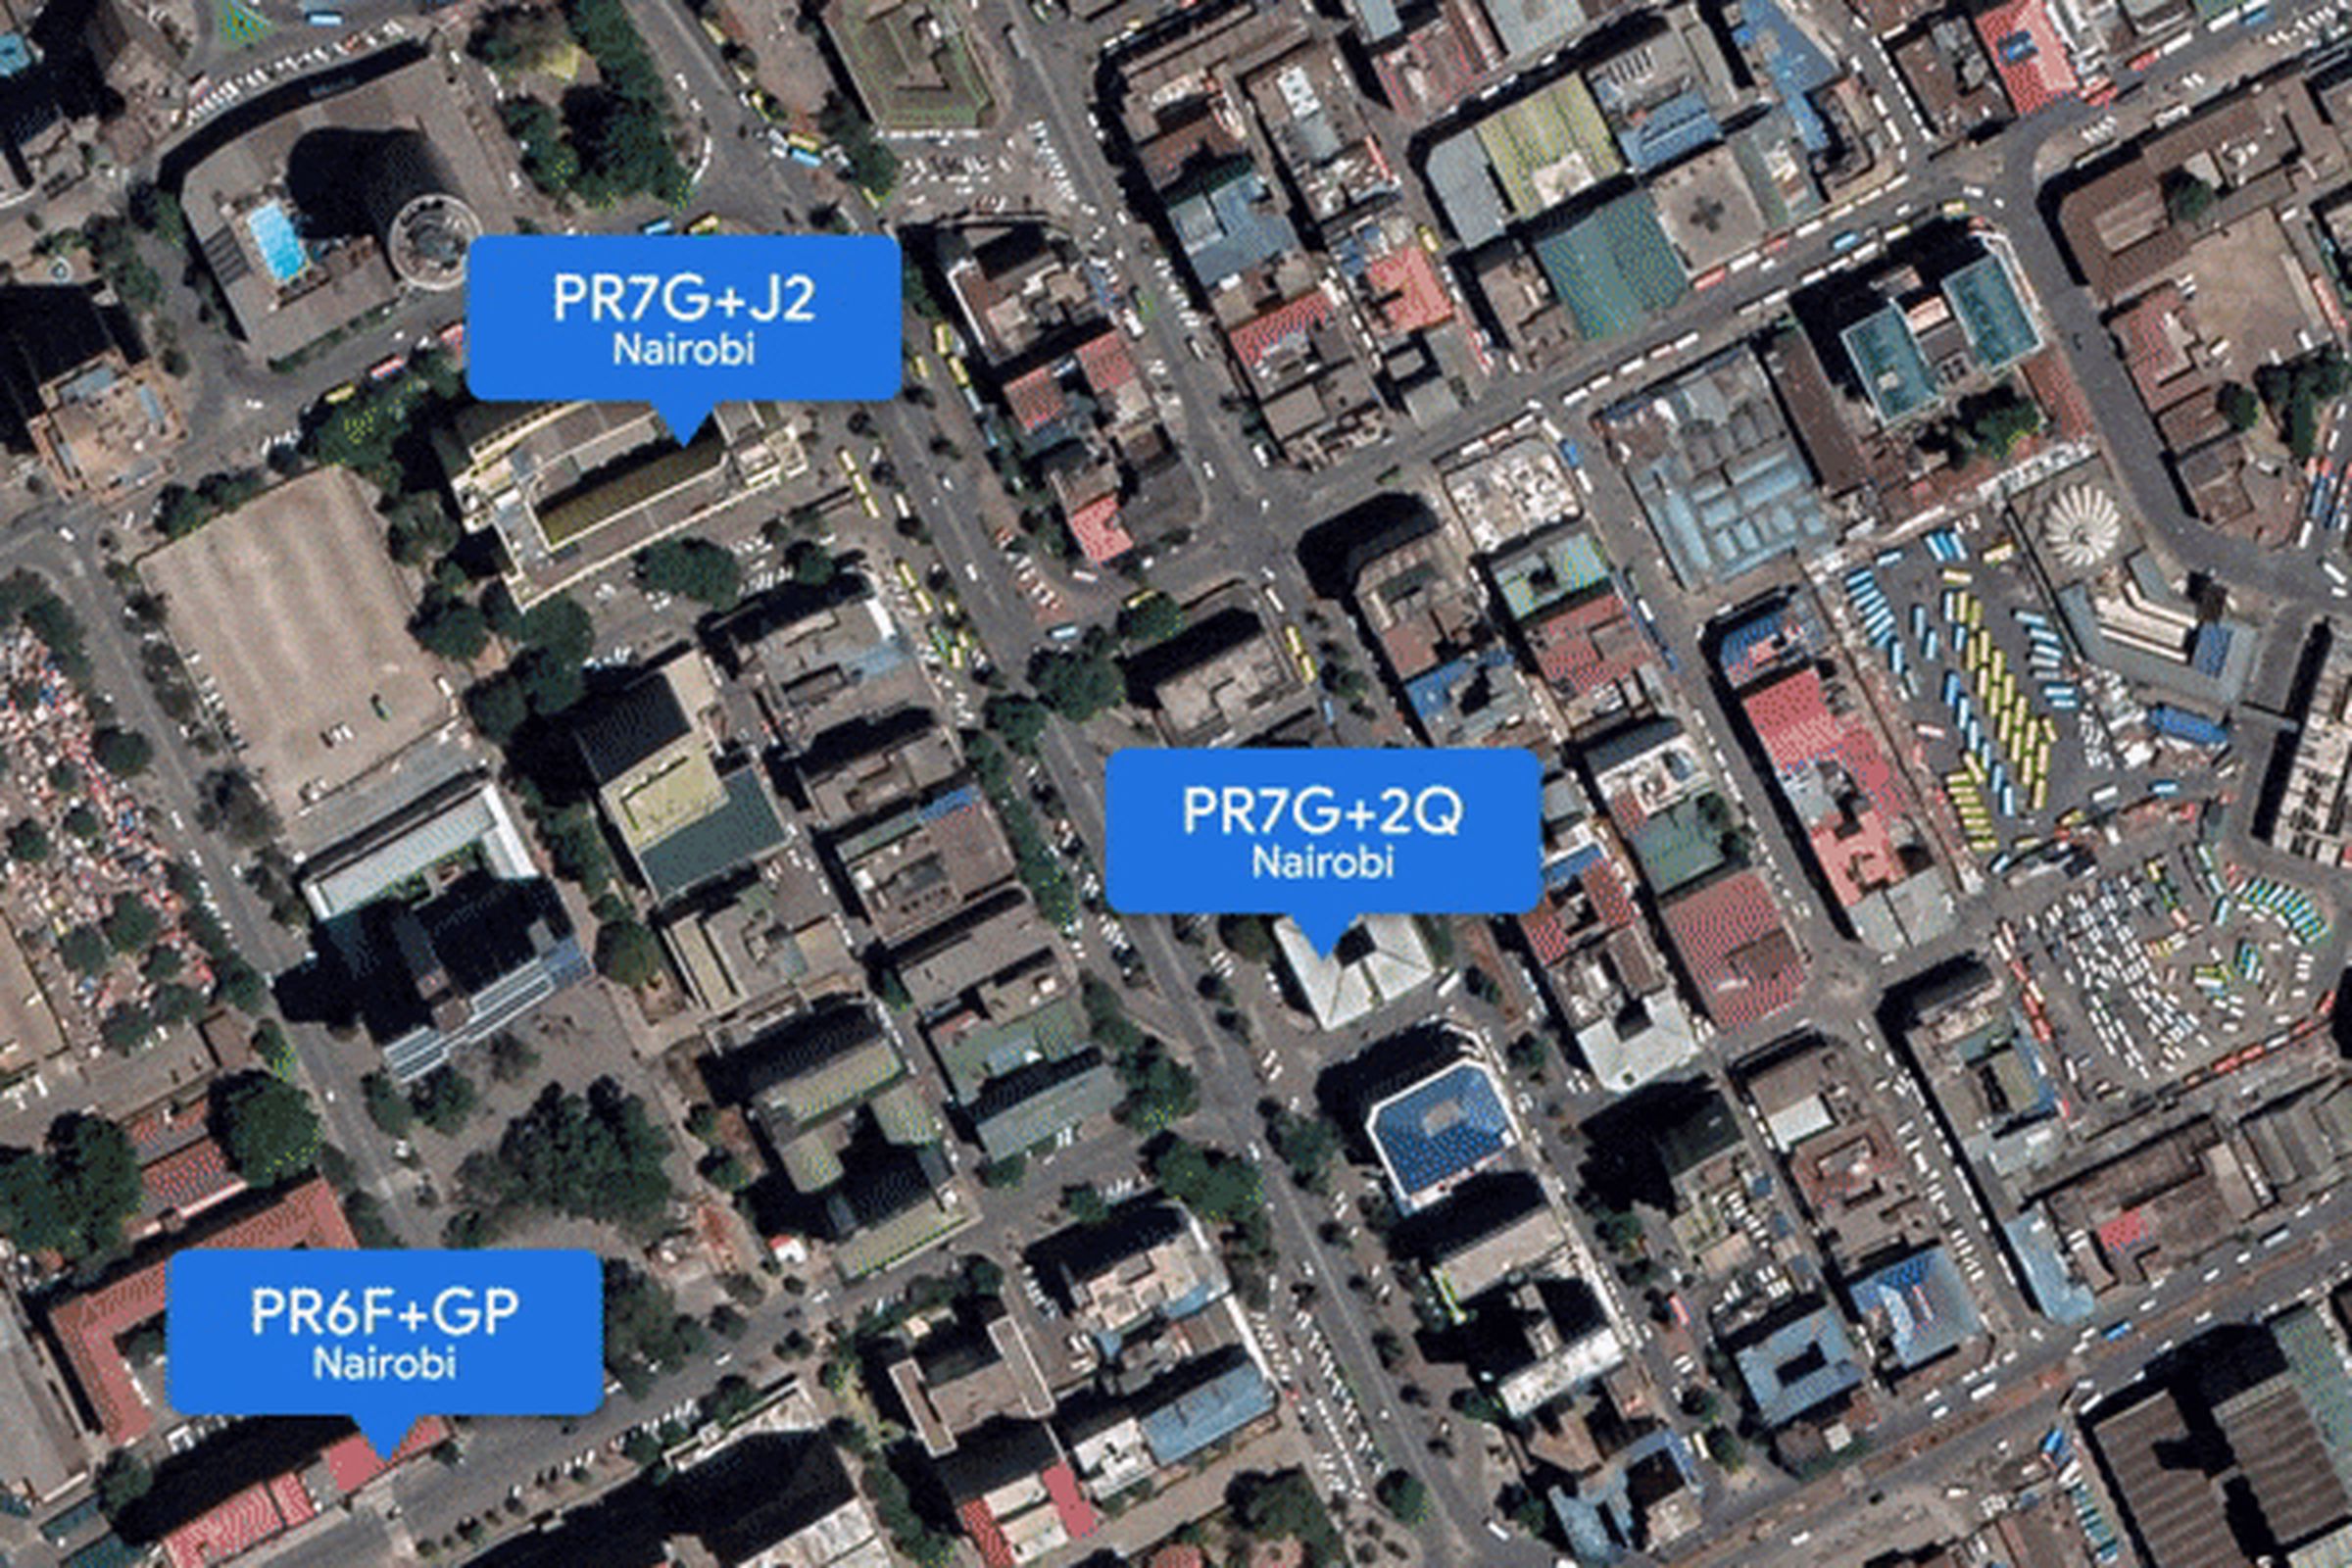 Plus Codes consist of six digits, and can represent locations when street addresses aren’t in common use. 